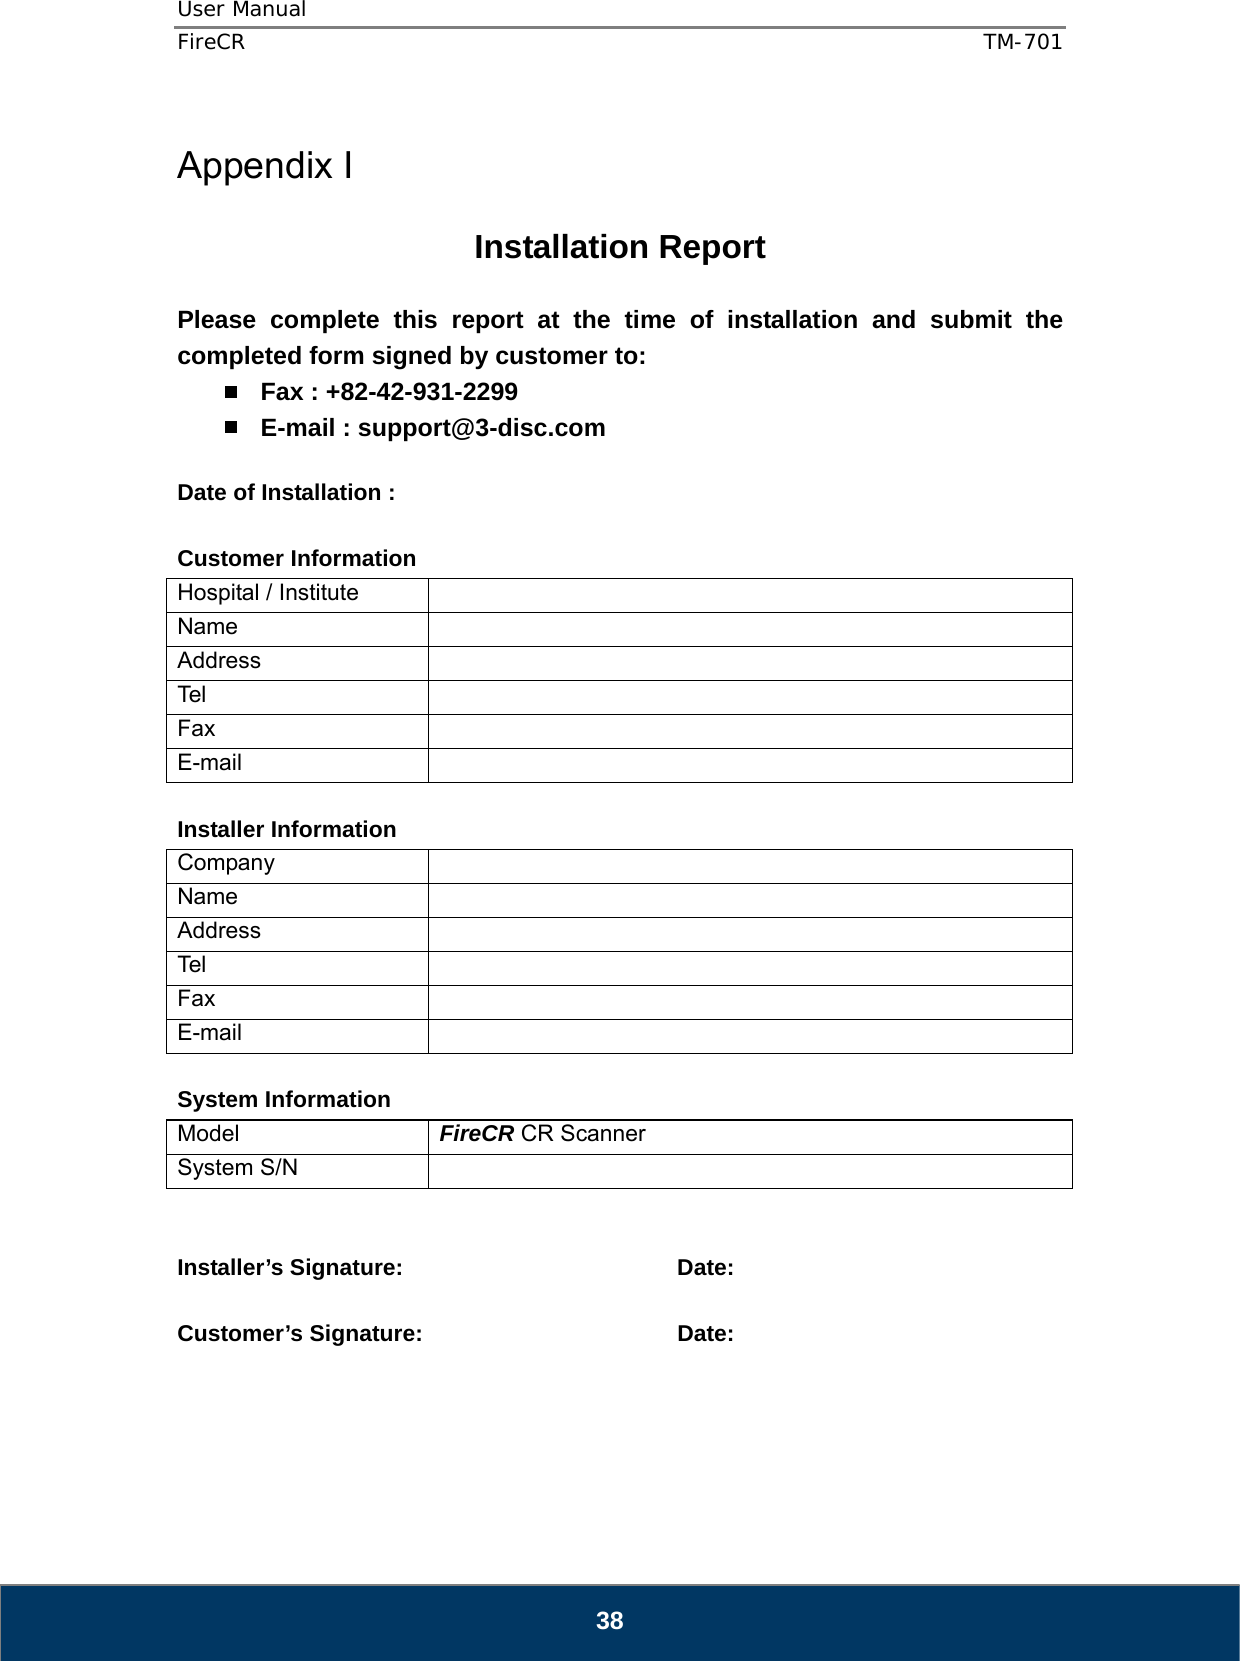 User Manual  FireCR  TM-701   38  Appendix I  Installation Report  Please complete this report at the time of installation and submit the completed form signed by customer to:  Fax : +82-42-931-2299  E-mail : support@3-disc.com  Date of Installation :    Customer Information Hospital / Institute   Name  Address  Tel   Fax  E-mail   Installer Information Company  Name  Address  Tel   Fax  E-mail   System Information Model  FireCR CR Scanner System S/N     Installer’s Signature:    Date:  Customer’s Signature:       Date:      